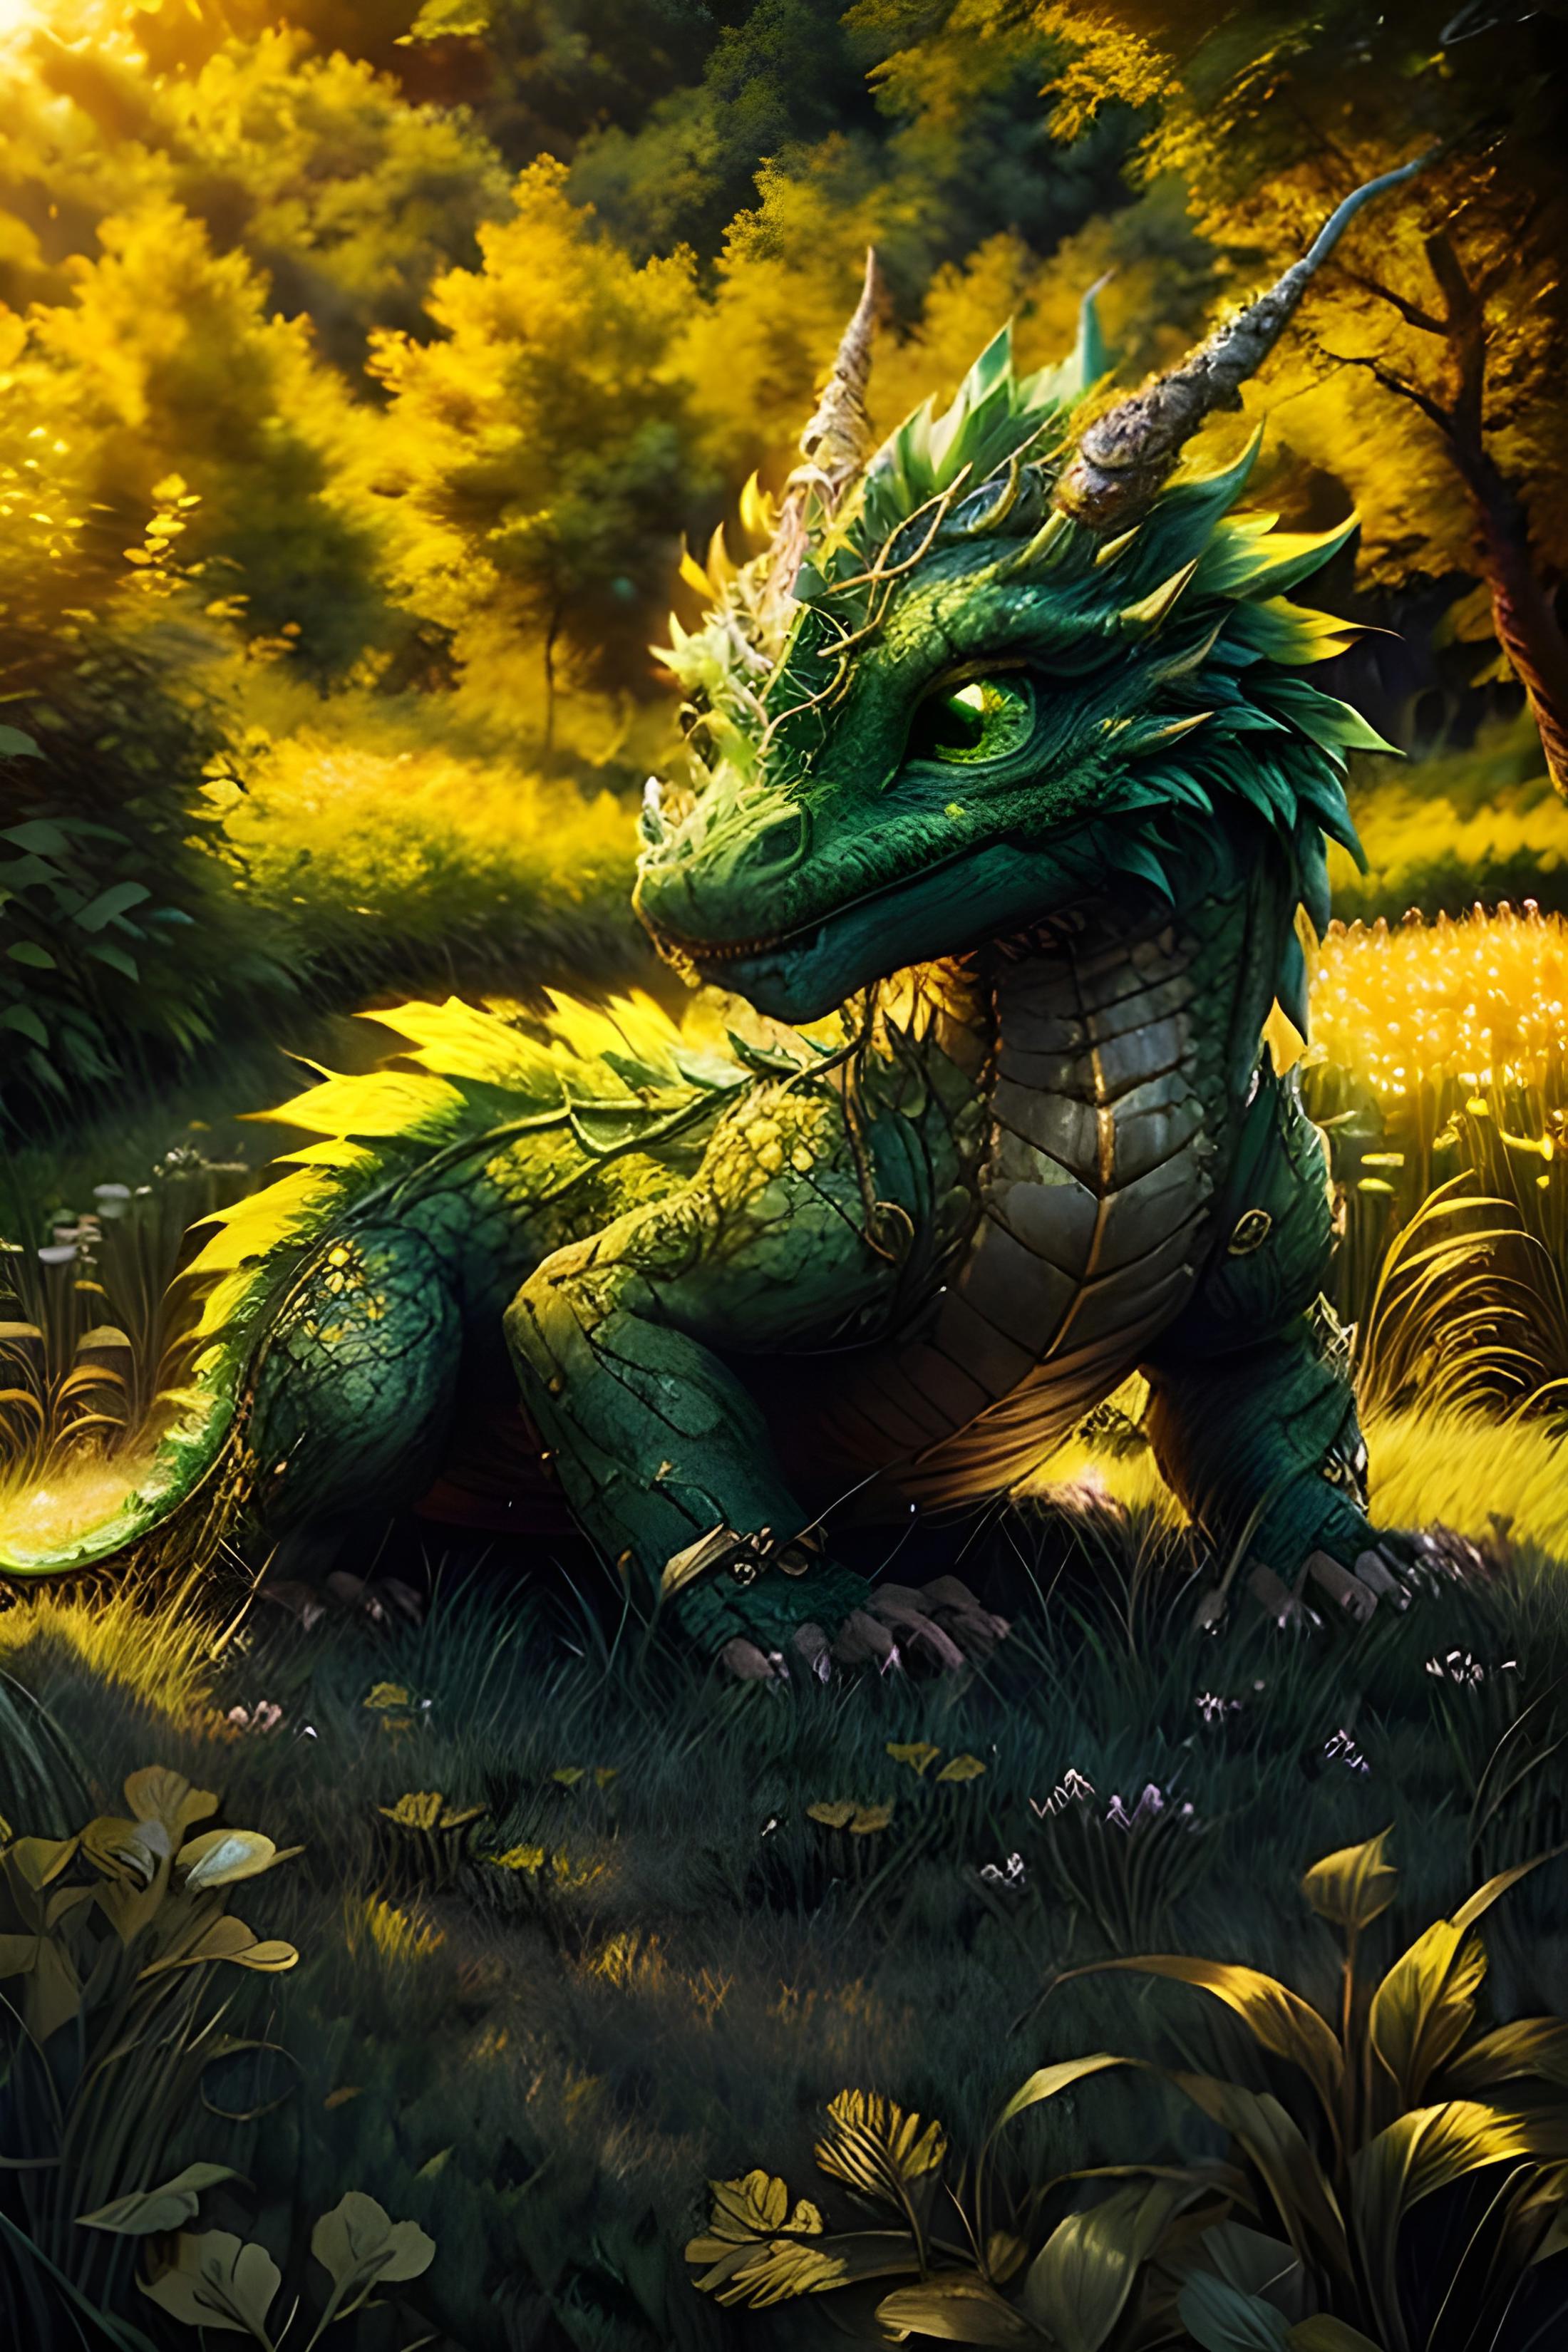 Western Fantasy Dragons image by AntUnderboot